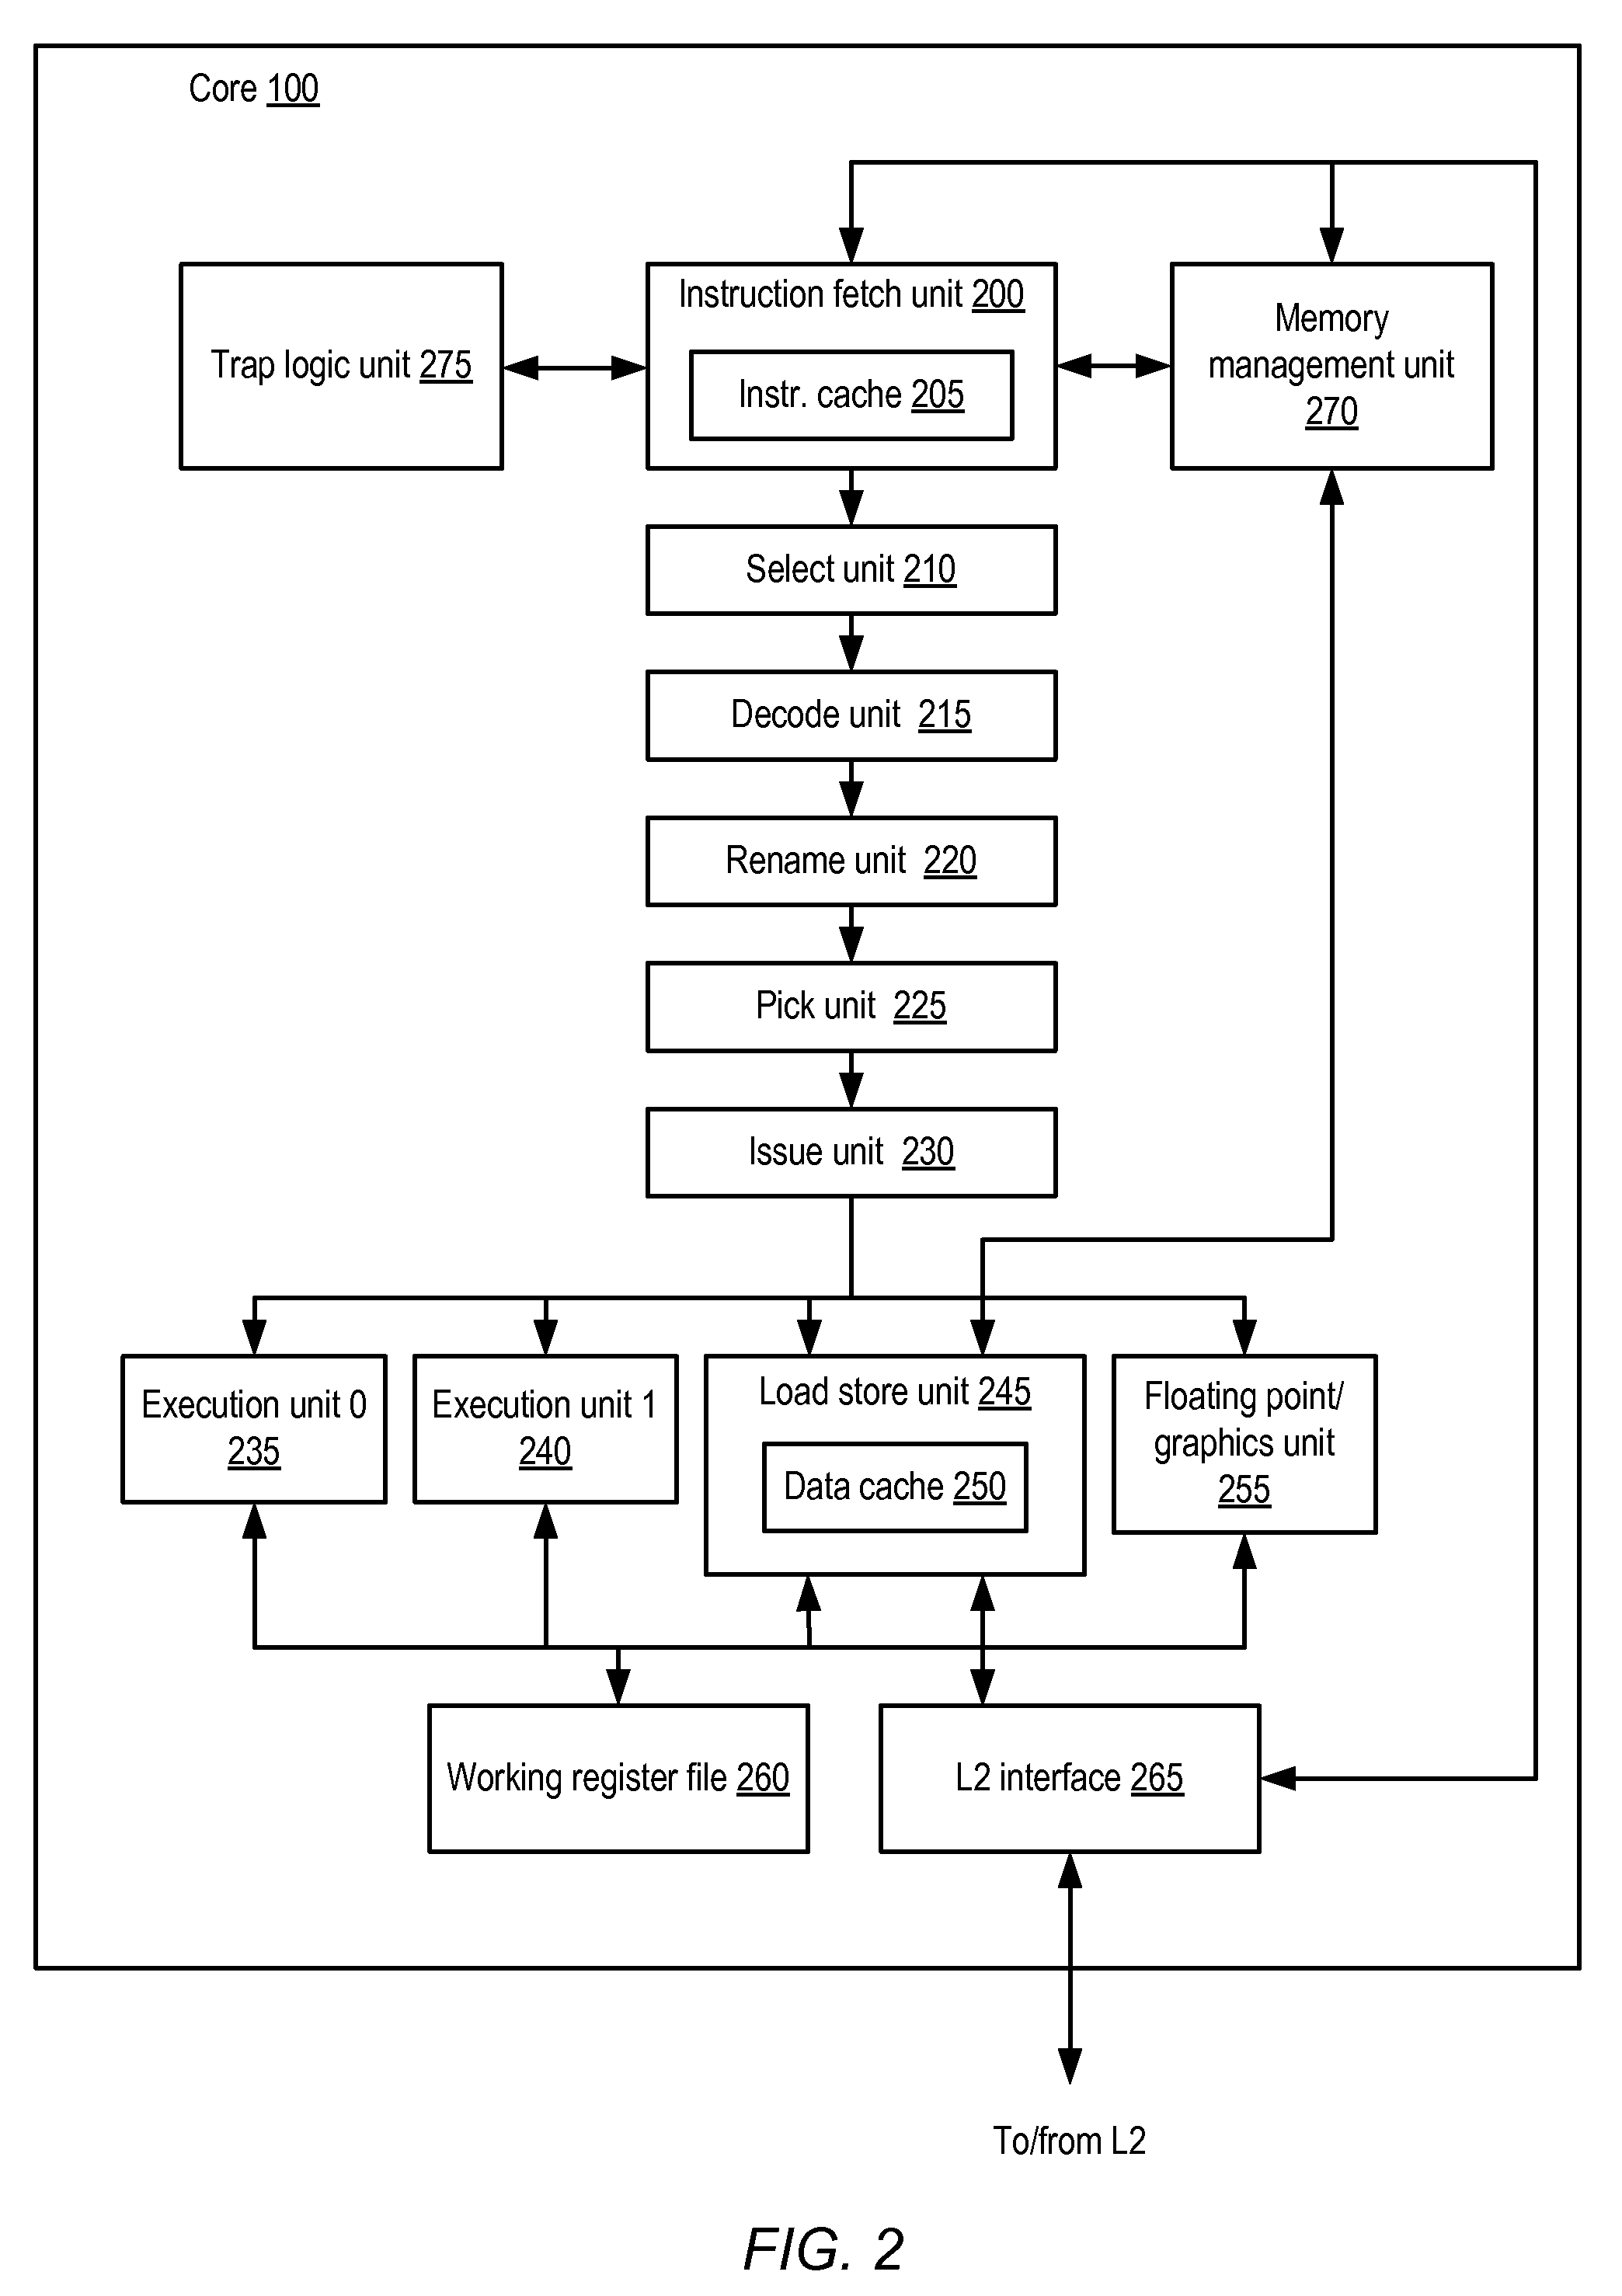 Apparatus and method for implementing hardware support for denormalized operands for floating-point divide operations